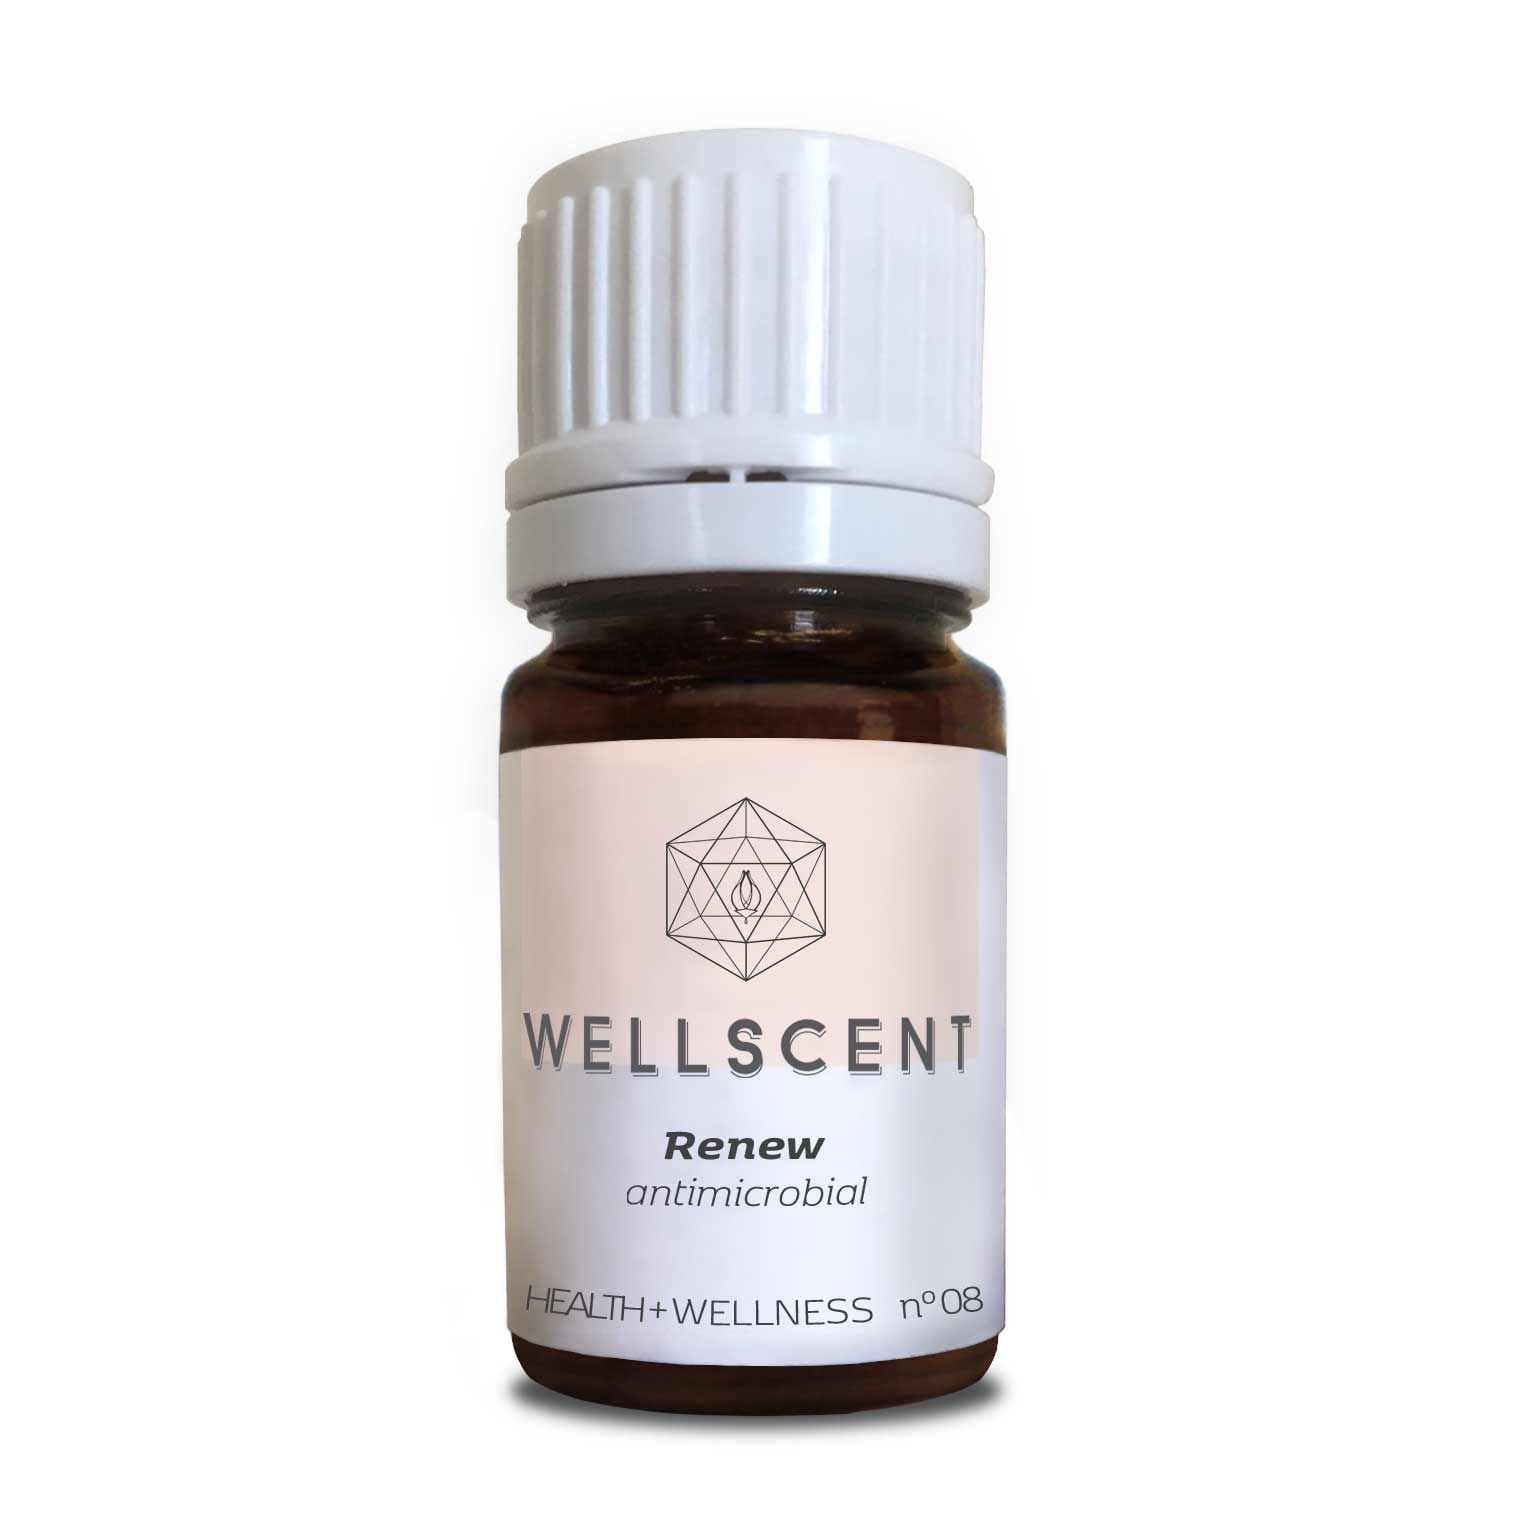 Renew – Antimicrobial, Lyme, Candida and Immune Support